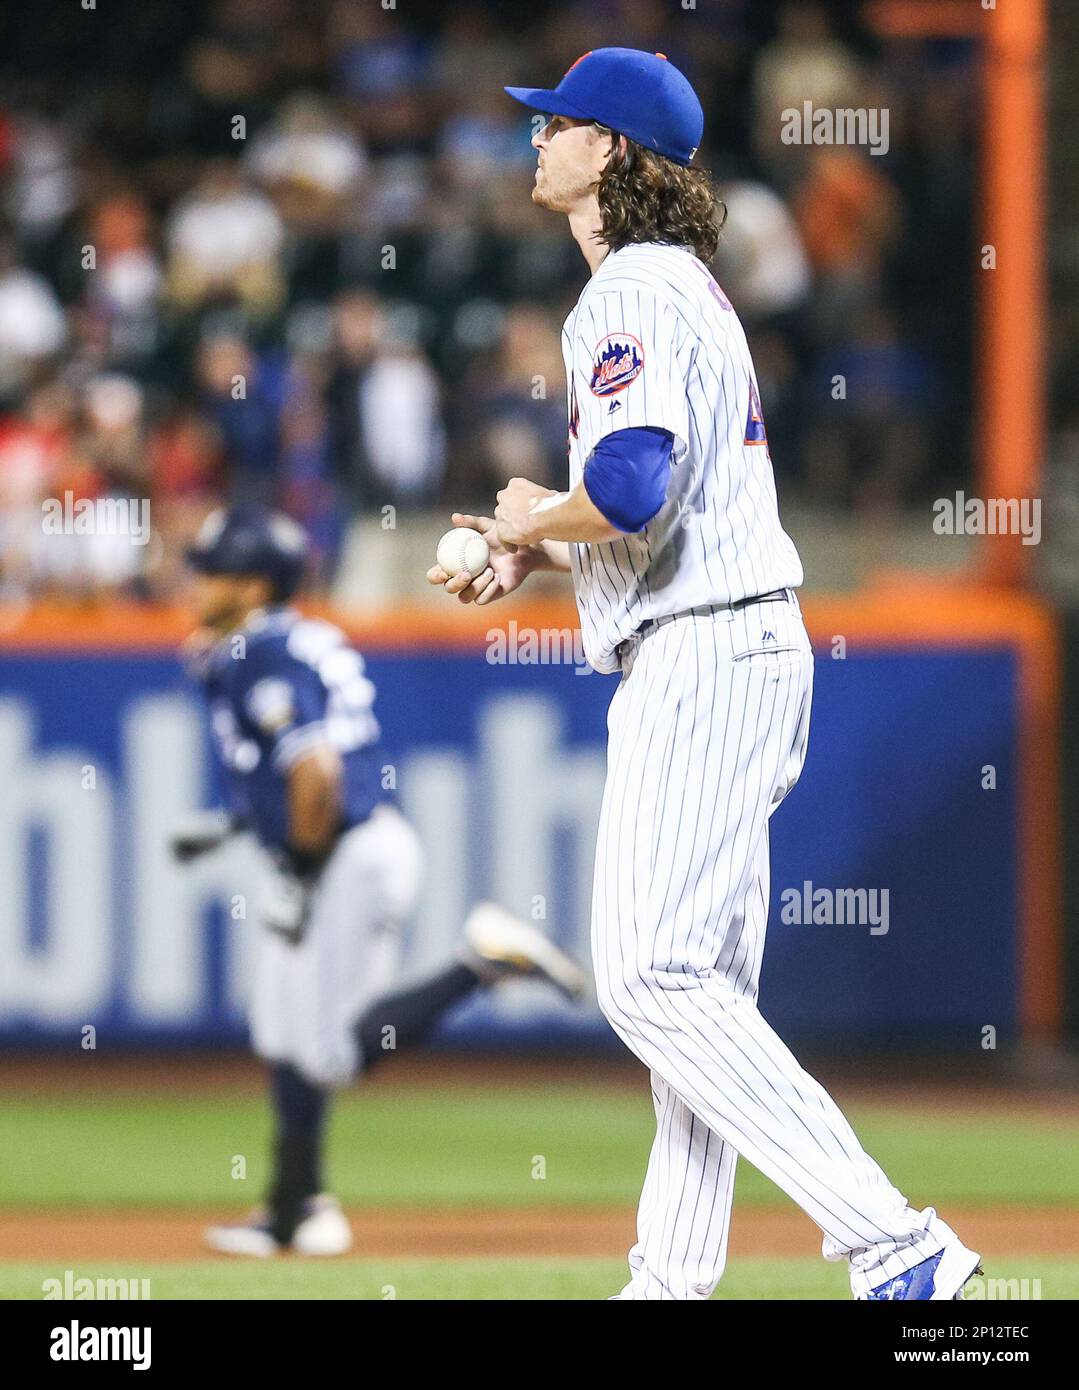 August 13, 2016: New York Mets Starting pitcher Jacob deGrom (48) [10741]  reacts after surrendering a game-tying home run to San Diego Padres Infield  Yangervis Solarte (26) [9704] during the seventh inning